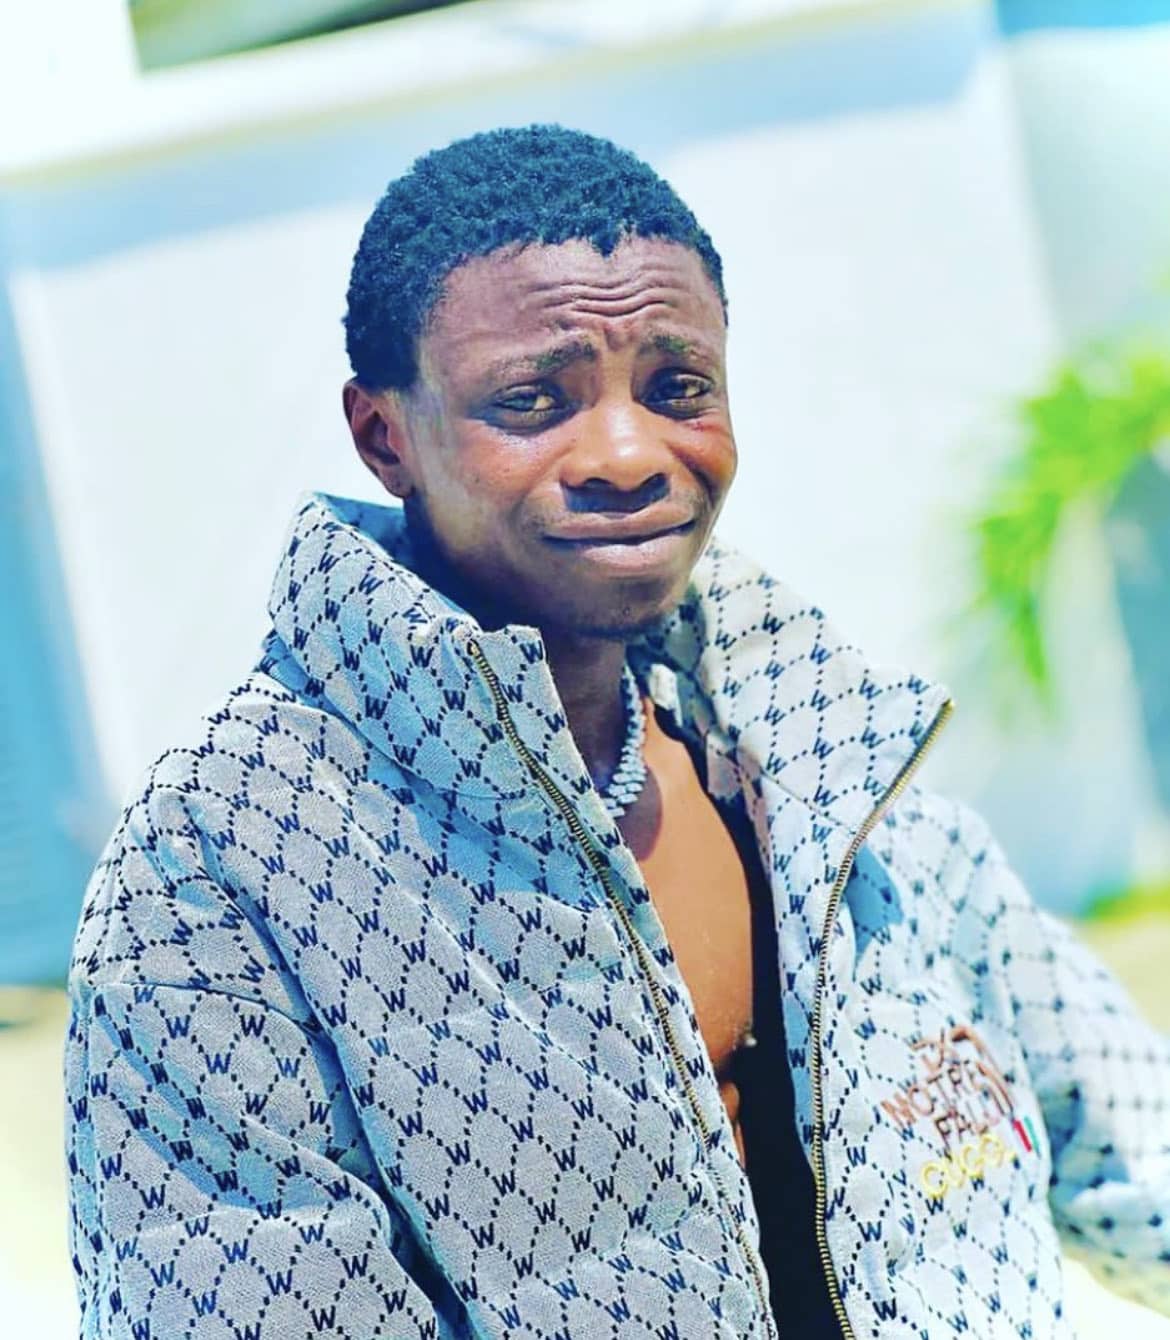 Portable turned me into car washer, physically assaulted me" – Young Duu alleges